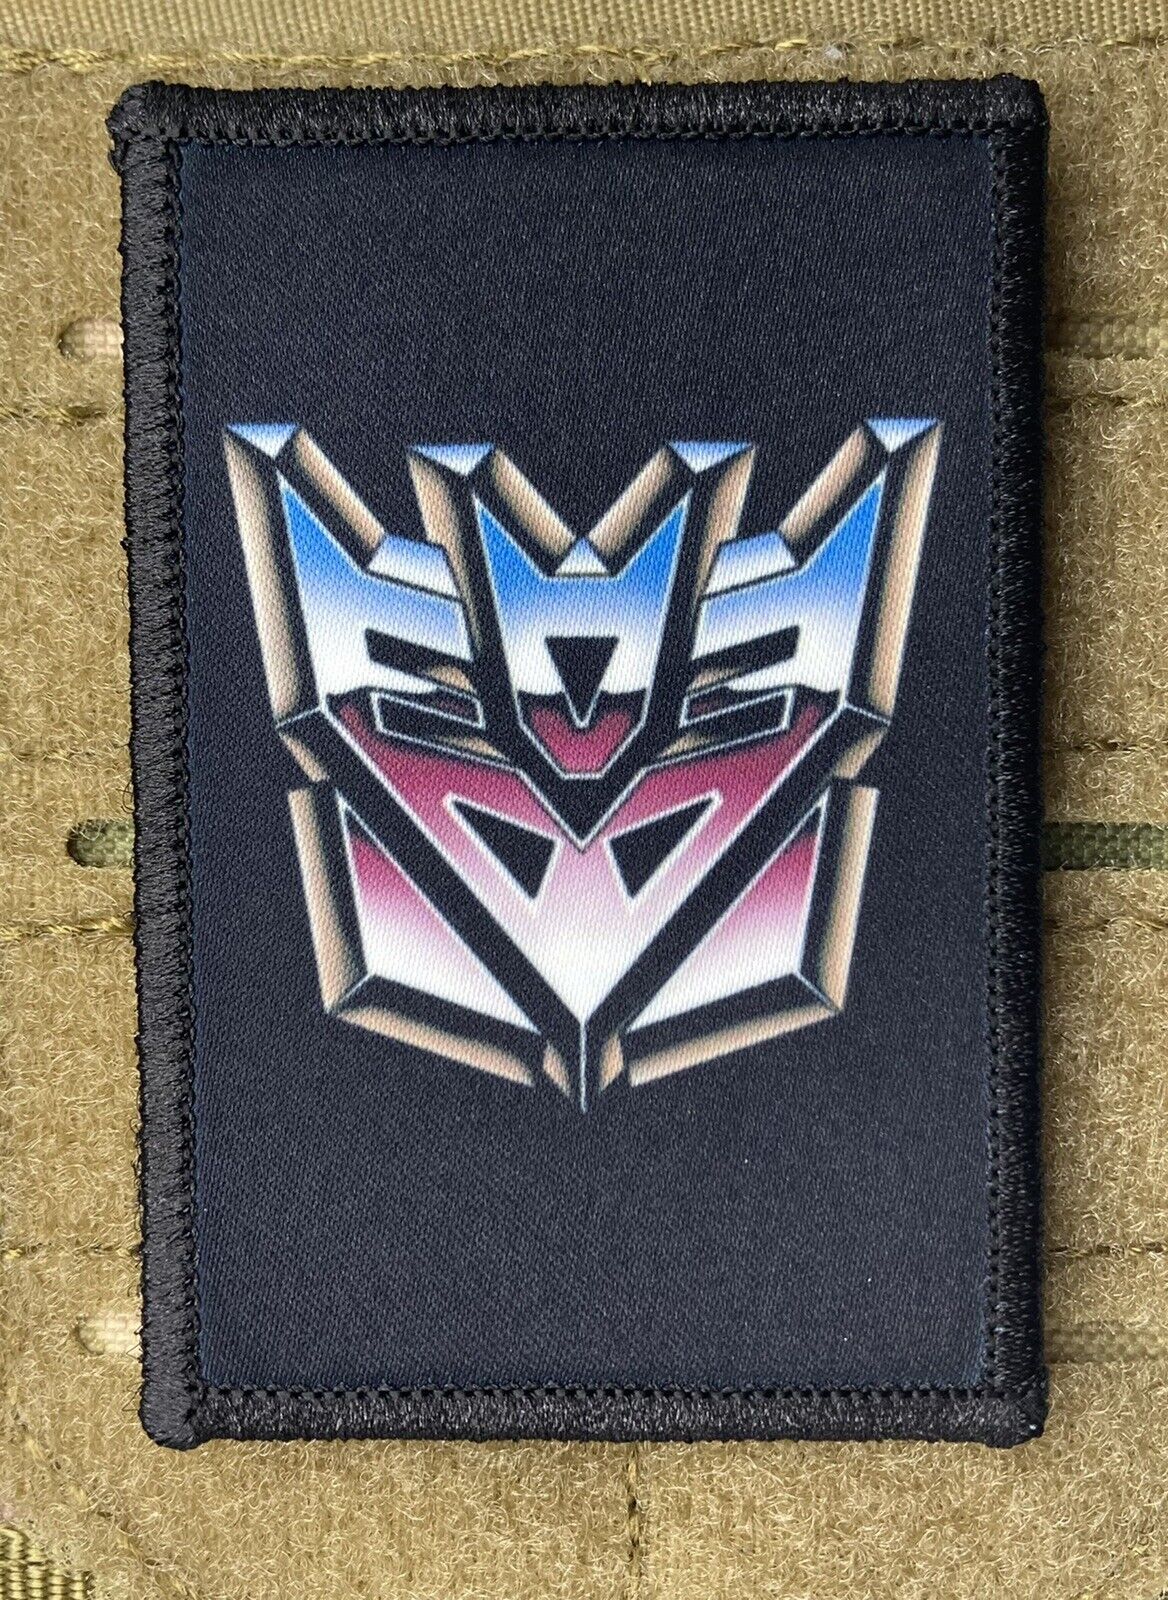 Transformers Decepticon Morale Patch / Military Badge ARMY Tactical Hook  40